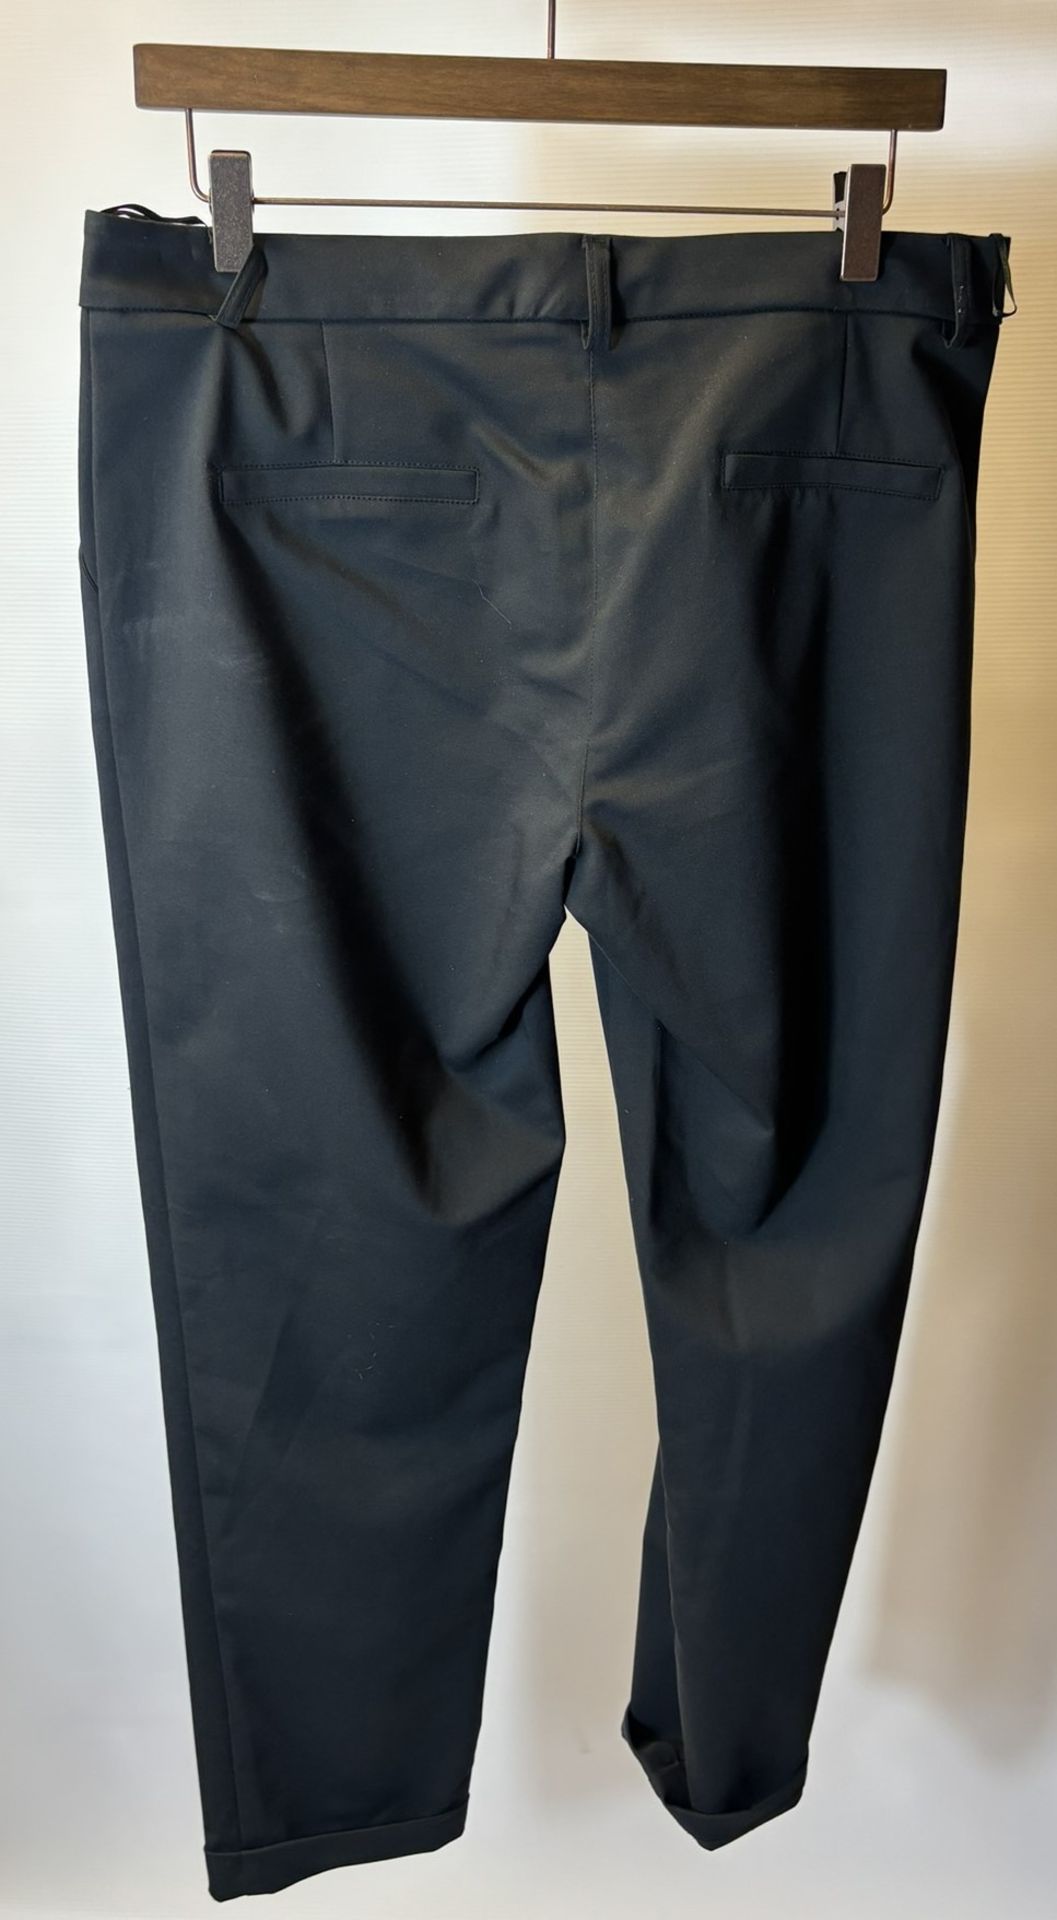 12 x Various Pairs Of Women's Trousers/Jeans As Seen In Photos - Image 2 of 36